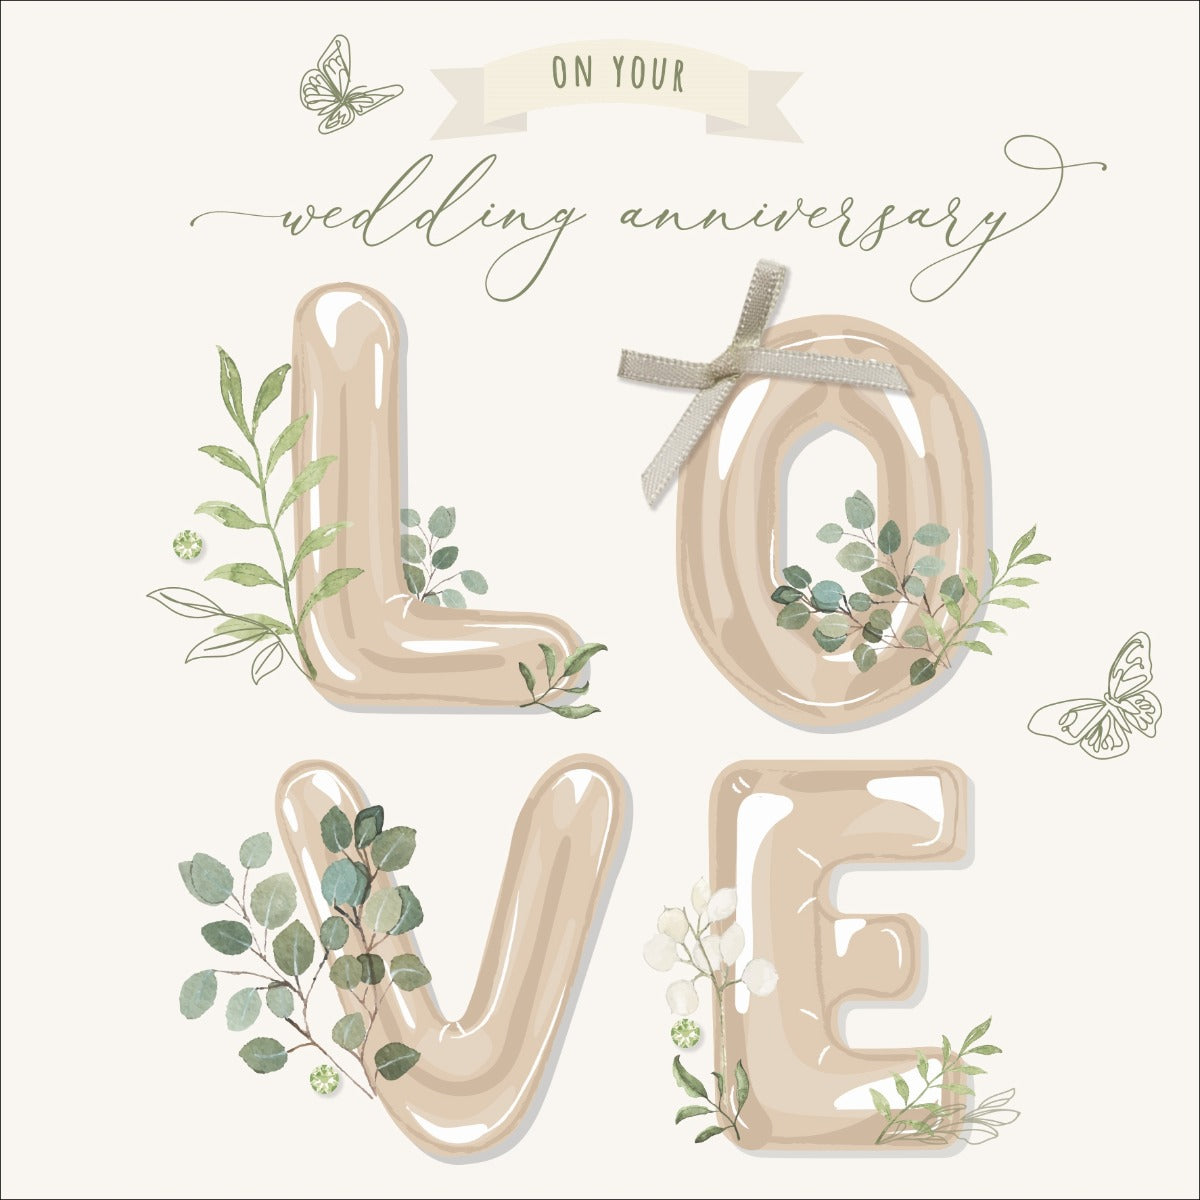 Besotted - On Your Wedding Anniversary Card